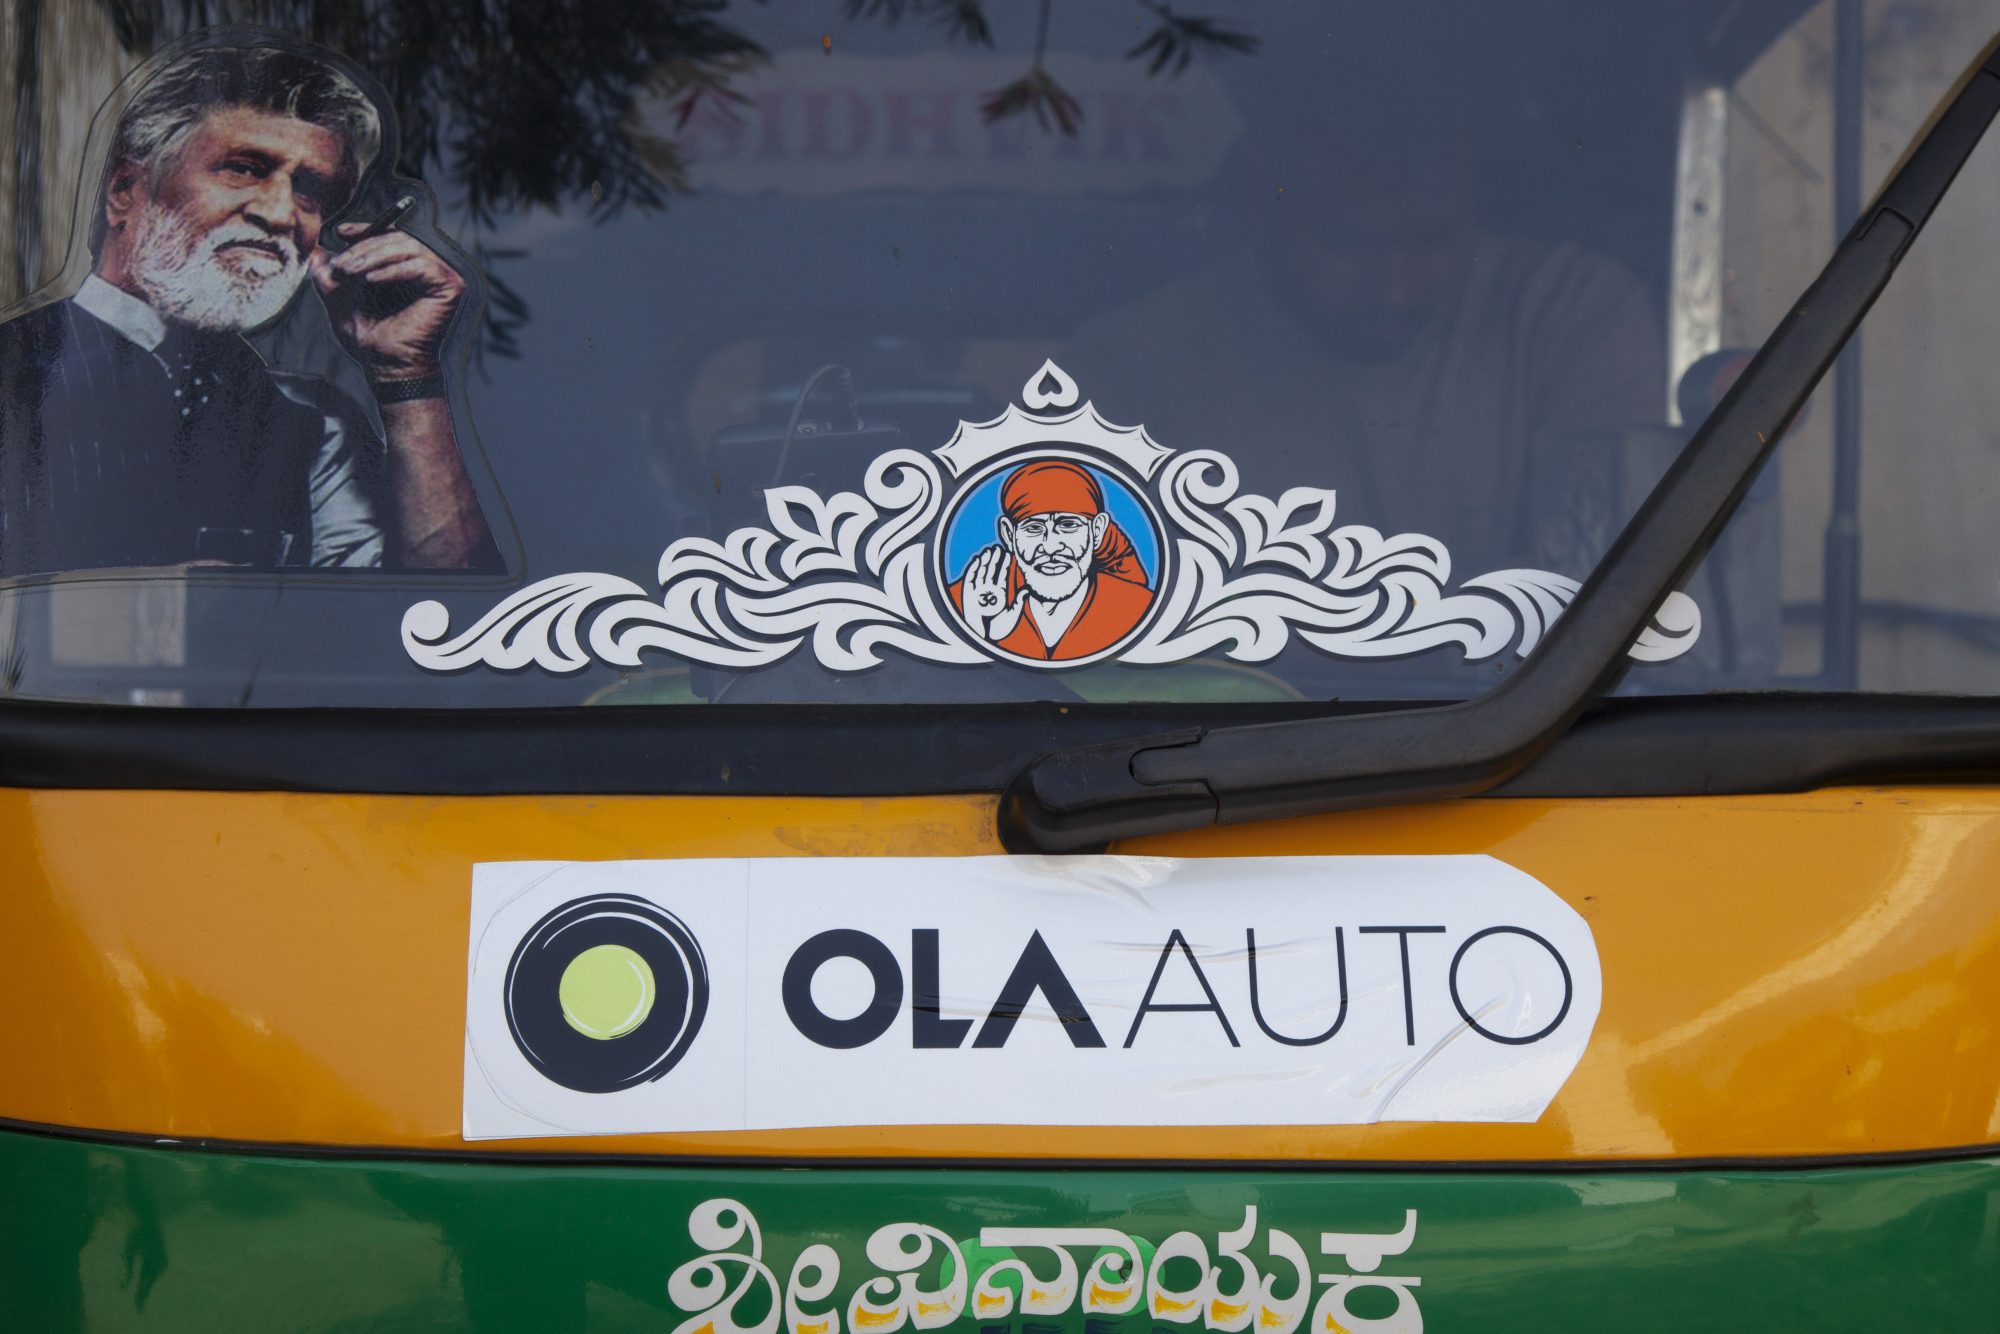 India's Ola aims to roll out a million electric vehicles by 2021